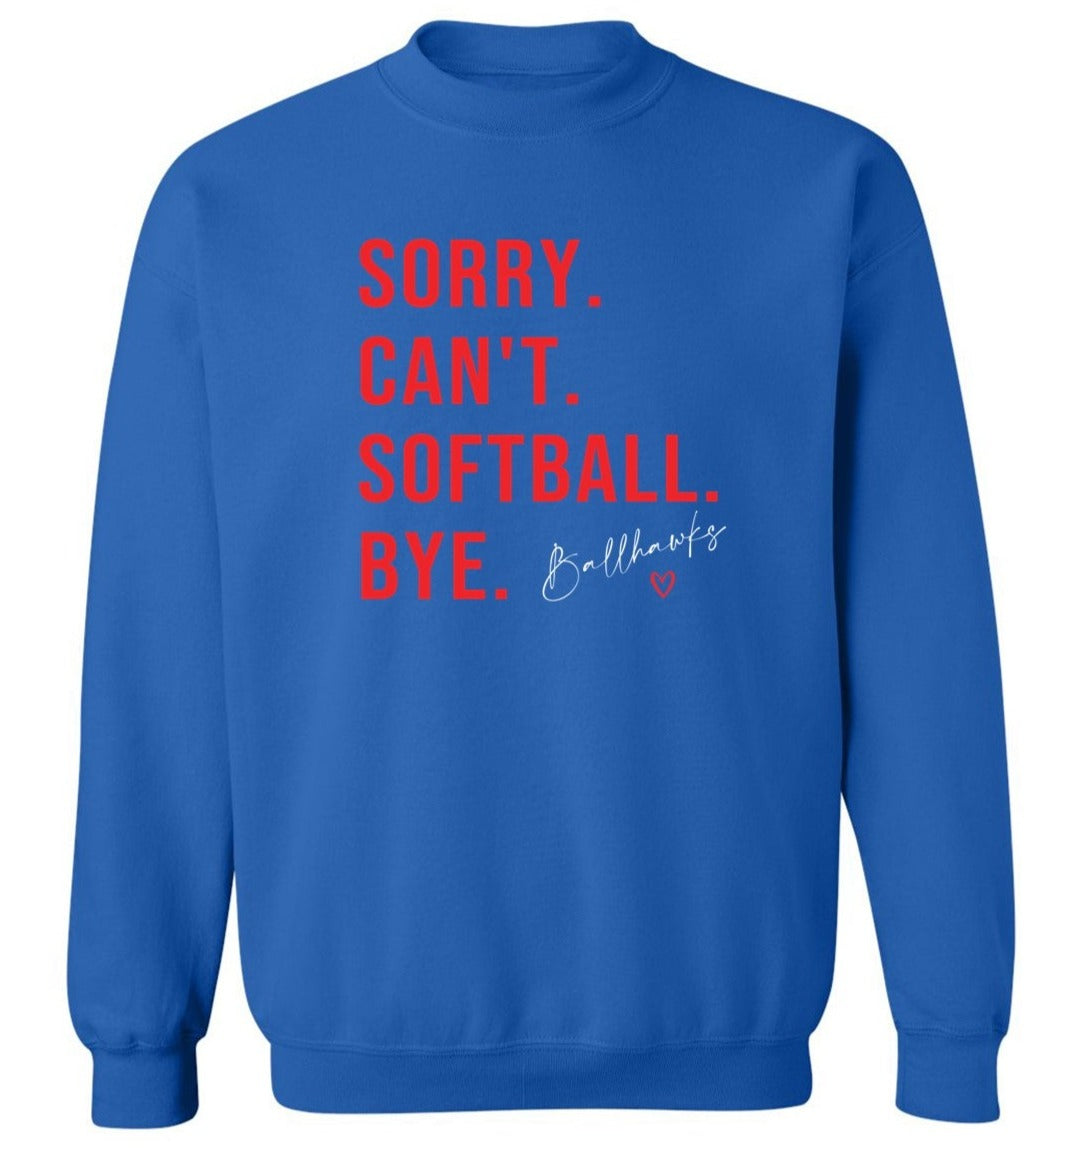 Ballhawks - Sorry Can't - Royal Blue- Lots of style options!